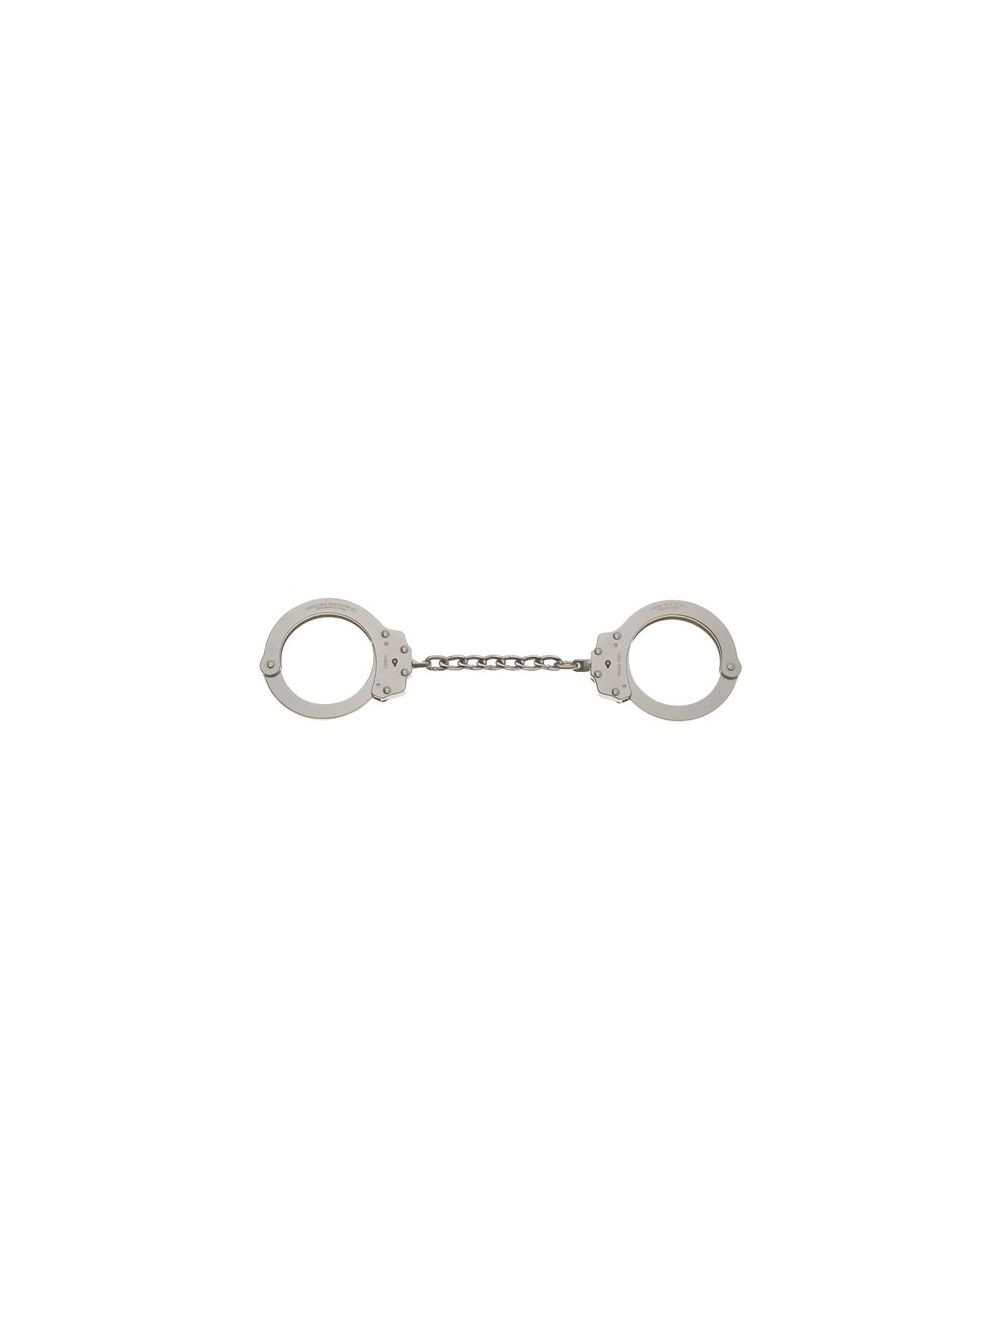 Model 702C-6X Oversize Extended Link Handcuff